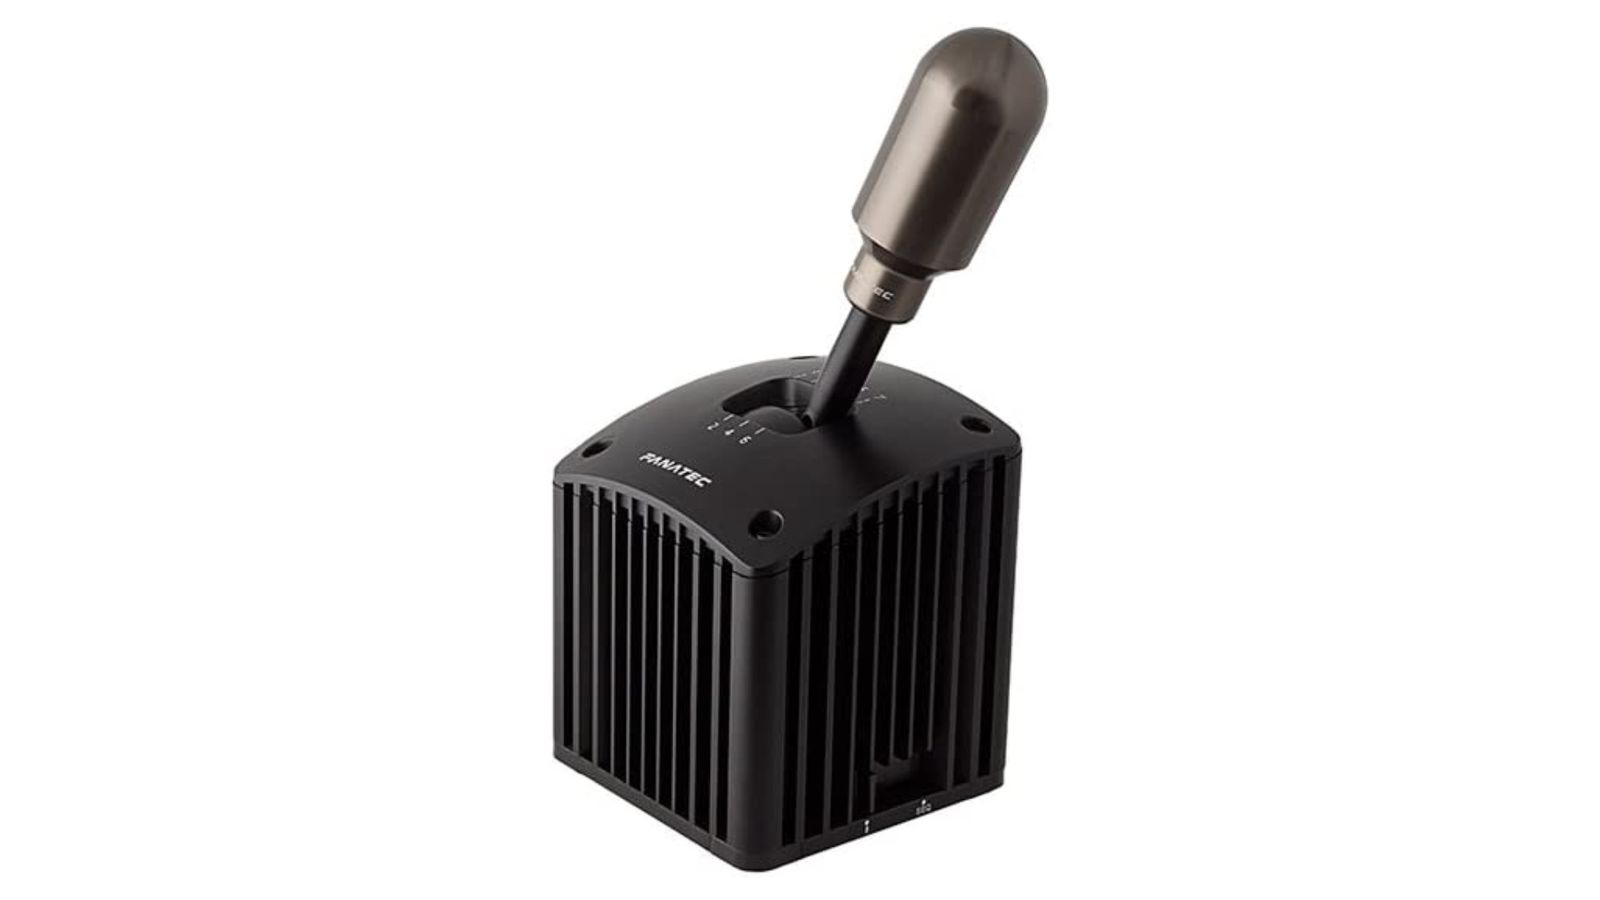 Fanatec ClubSport Shifter SQ v1.5 product image of a black and dark silver gear stick.